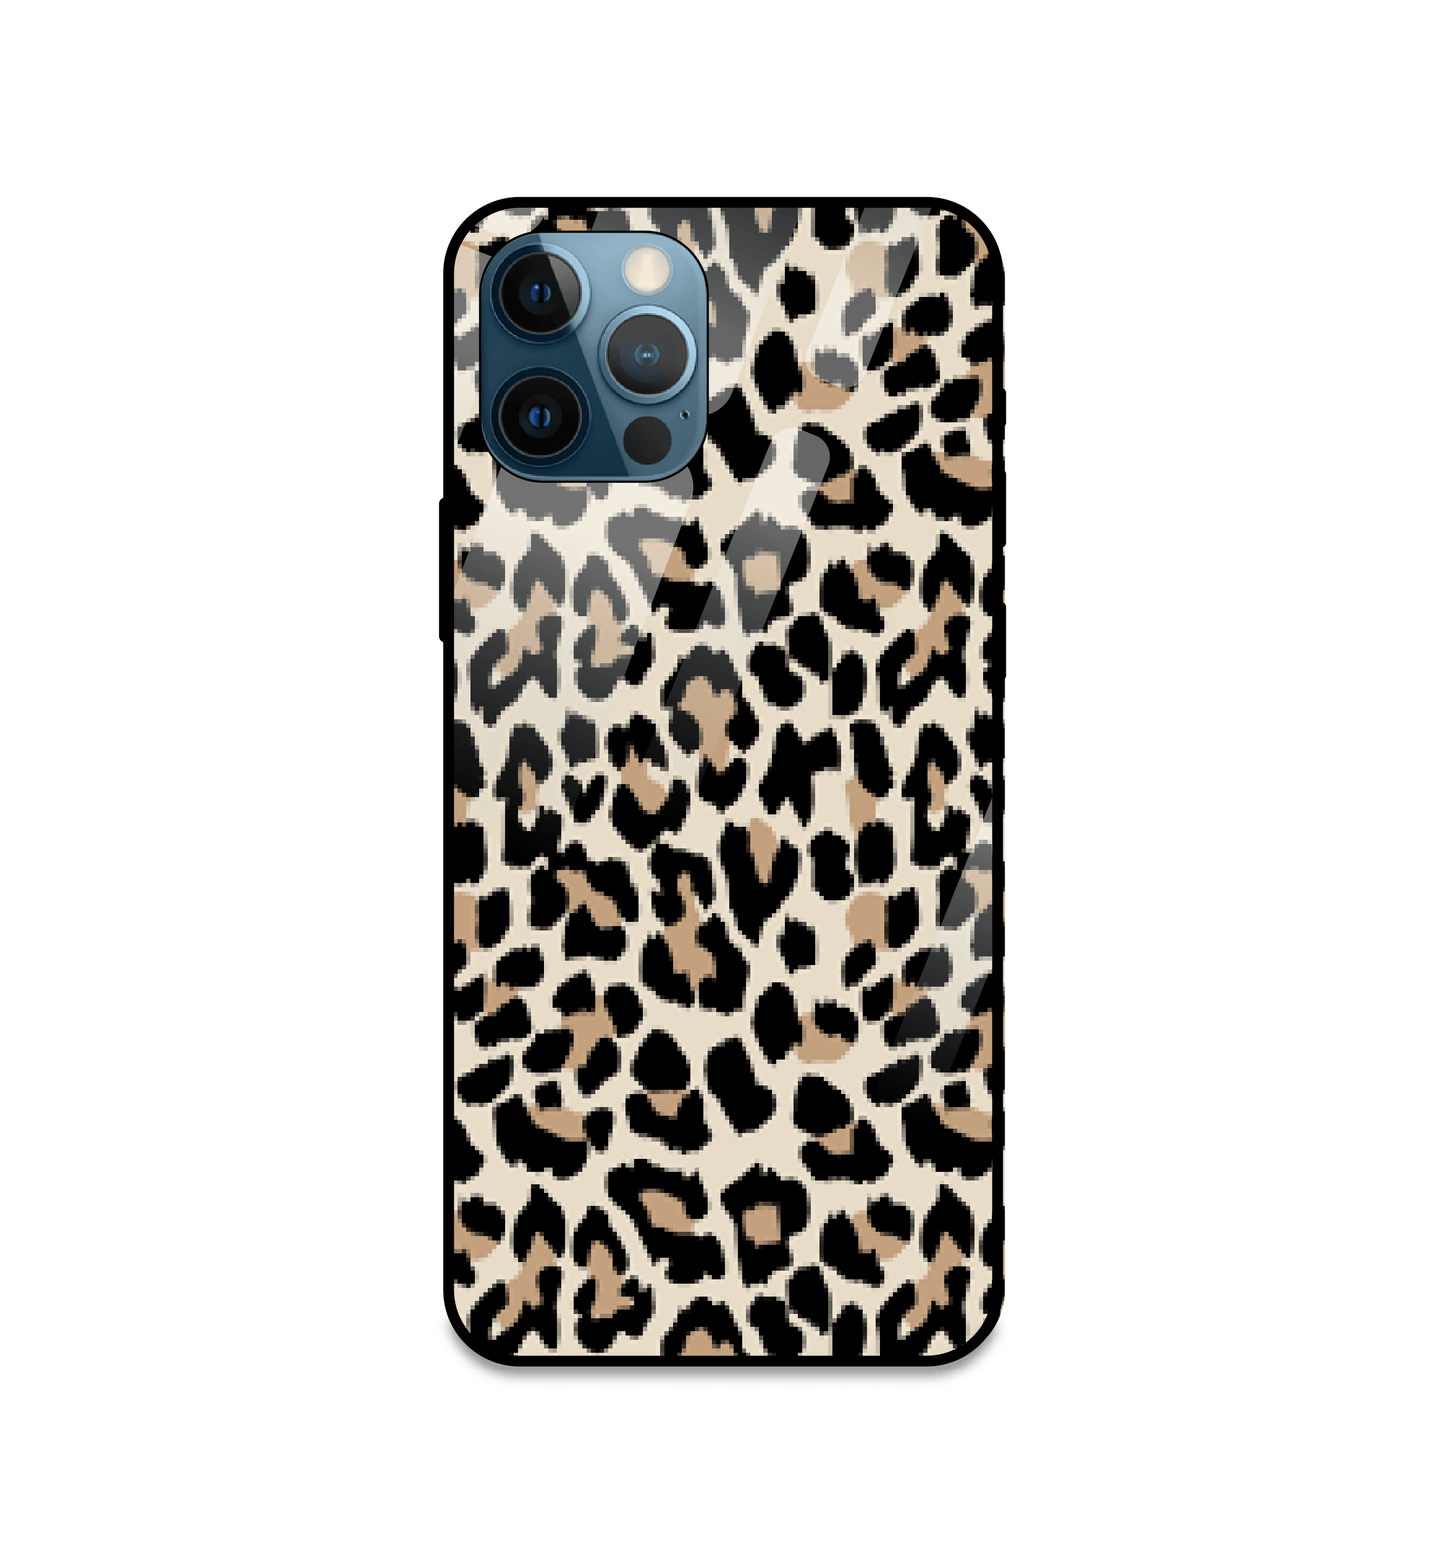 Leopard Print - Glass Cases For iPhone Models